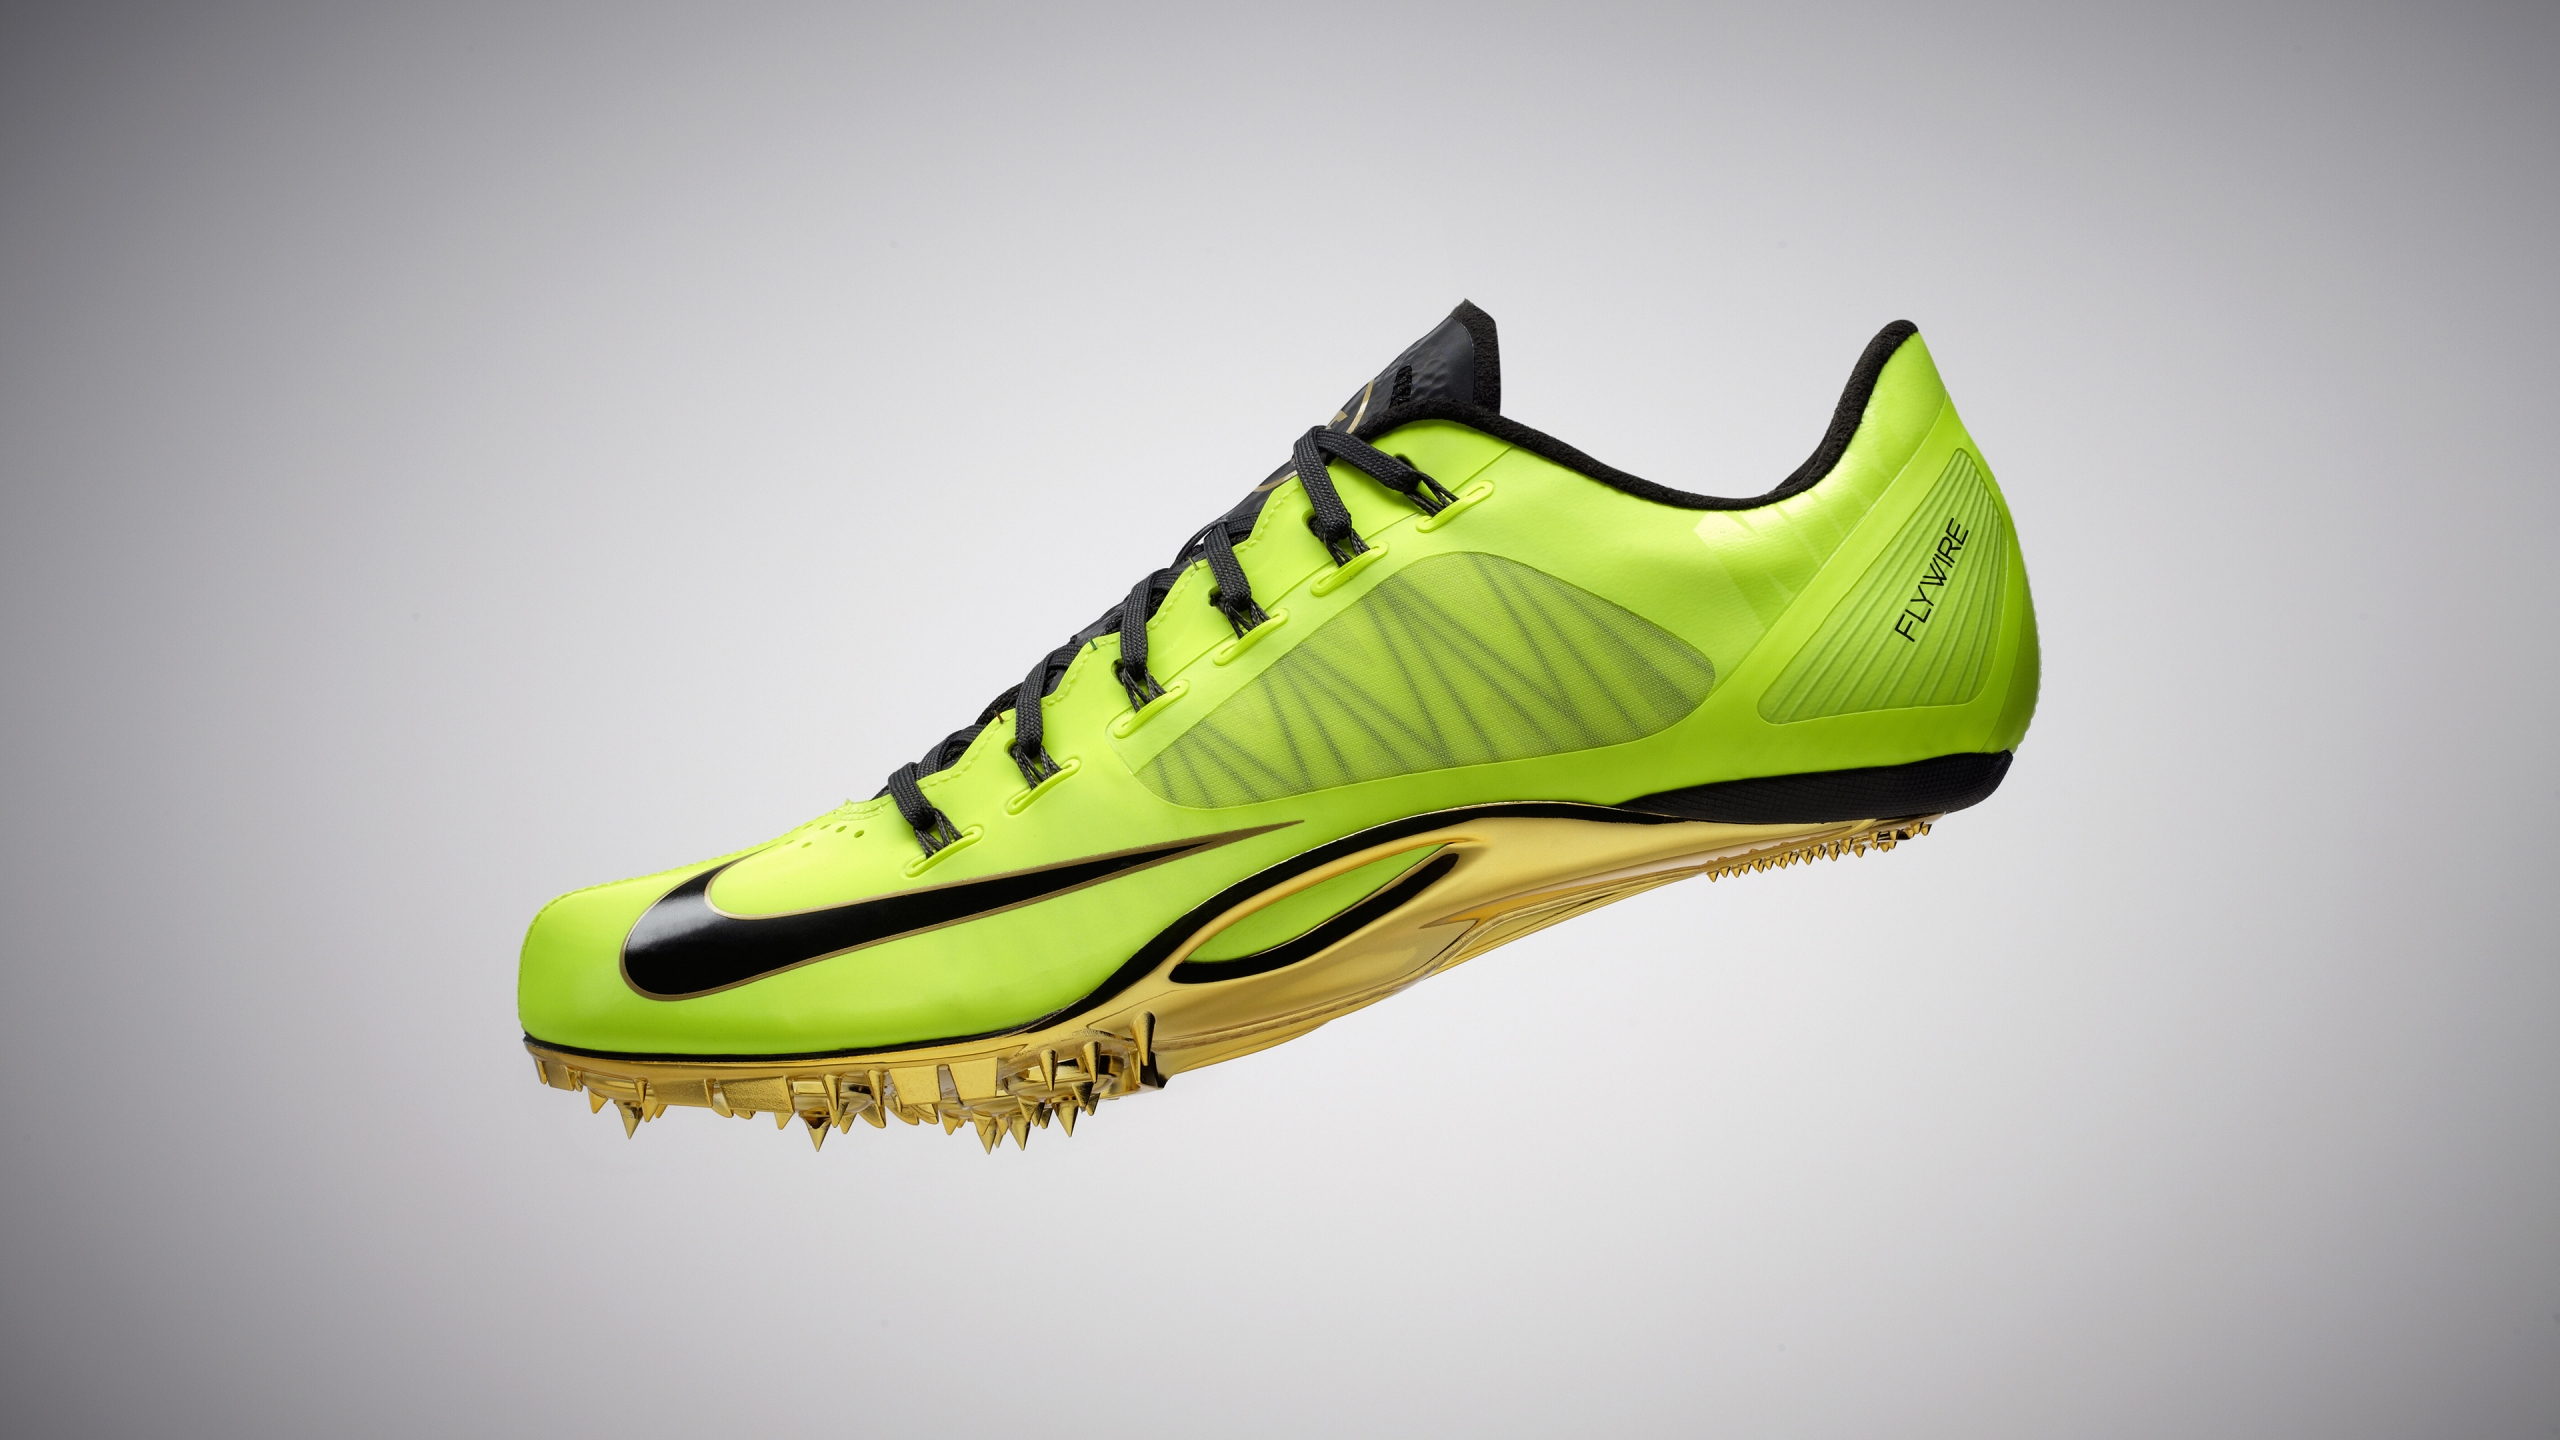 Nike Zoom Superfly R4 for 2560x1440 HDTV resolution